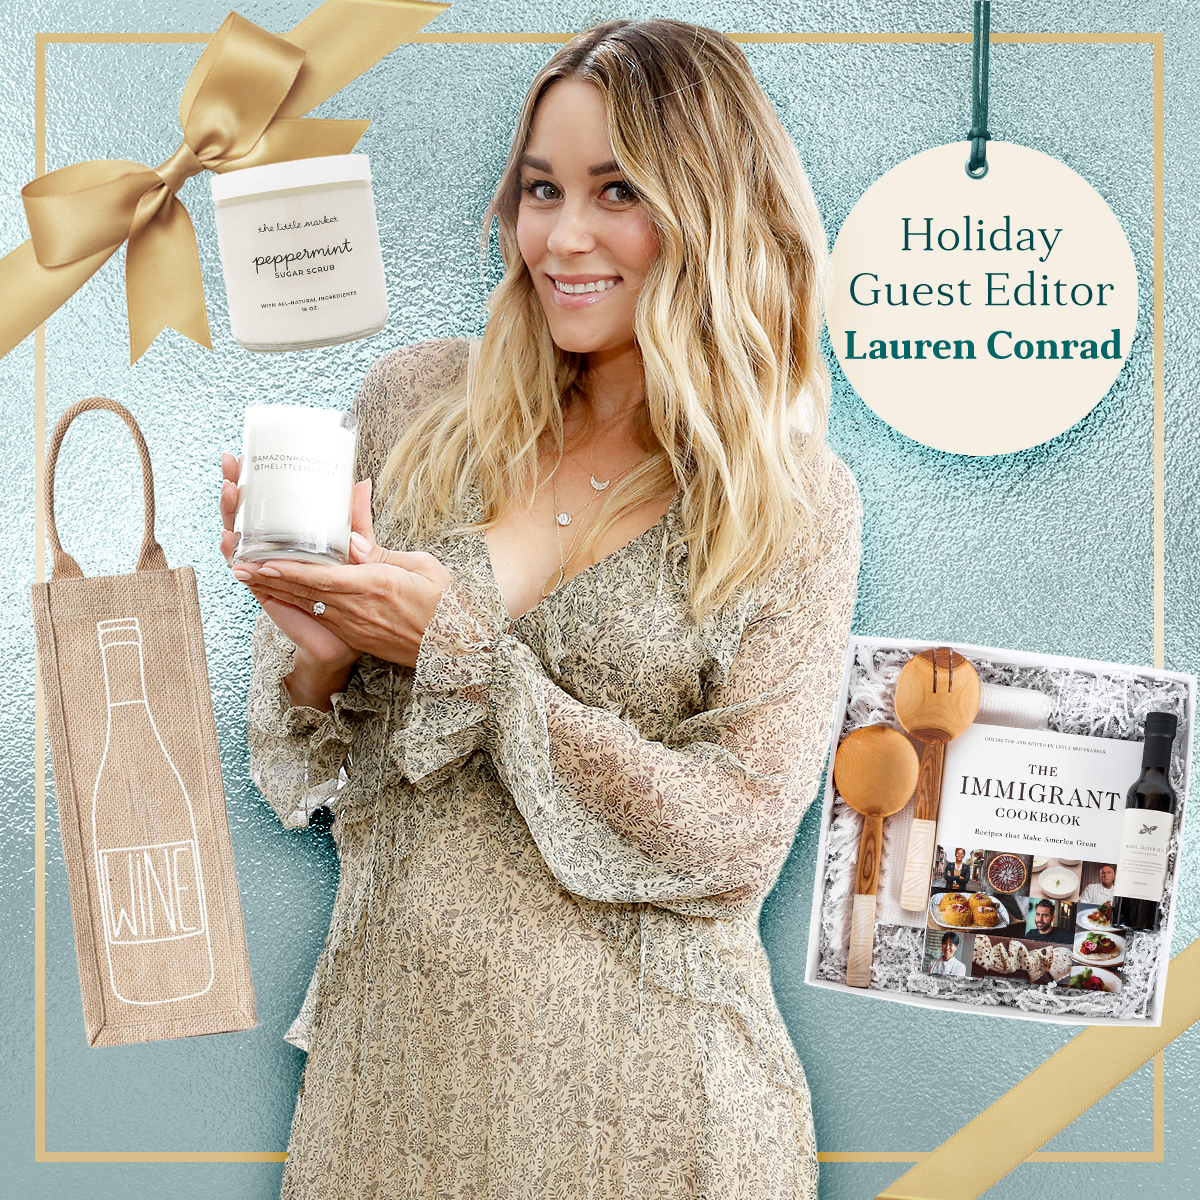 Lauren Conrad Used Her Own Love Story for Her Fragrance Inspiration